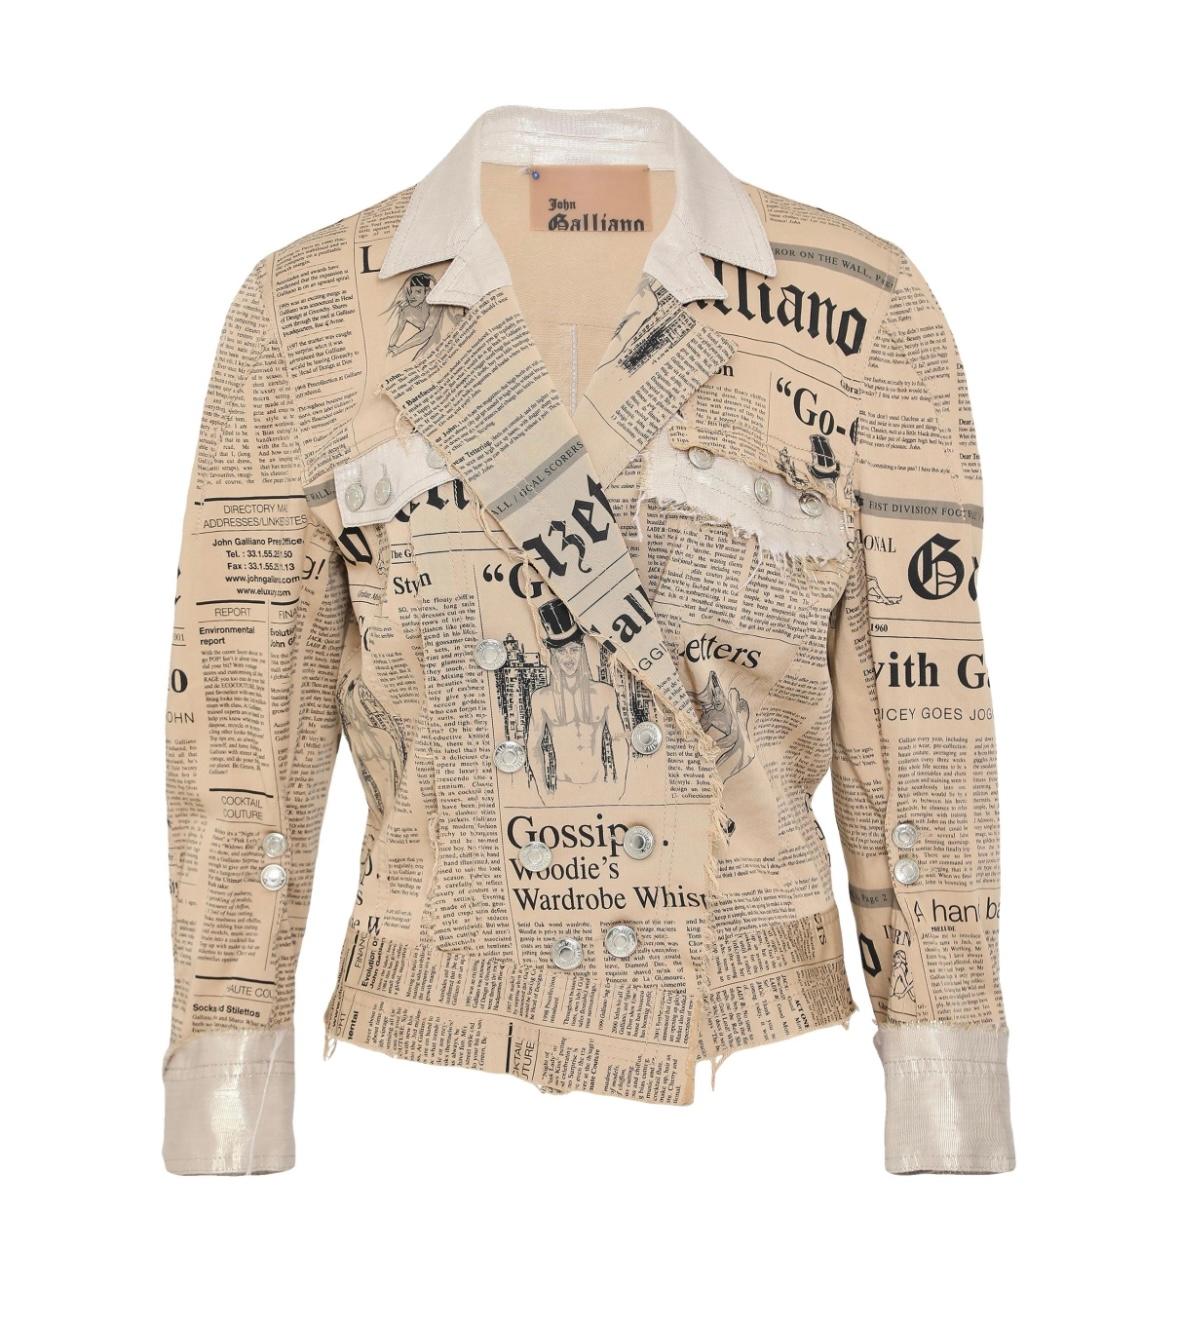 Vintage John Galliano 2005 Gazette print jacket 
Size 40 

Great condition, tried on only. Without tags 